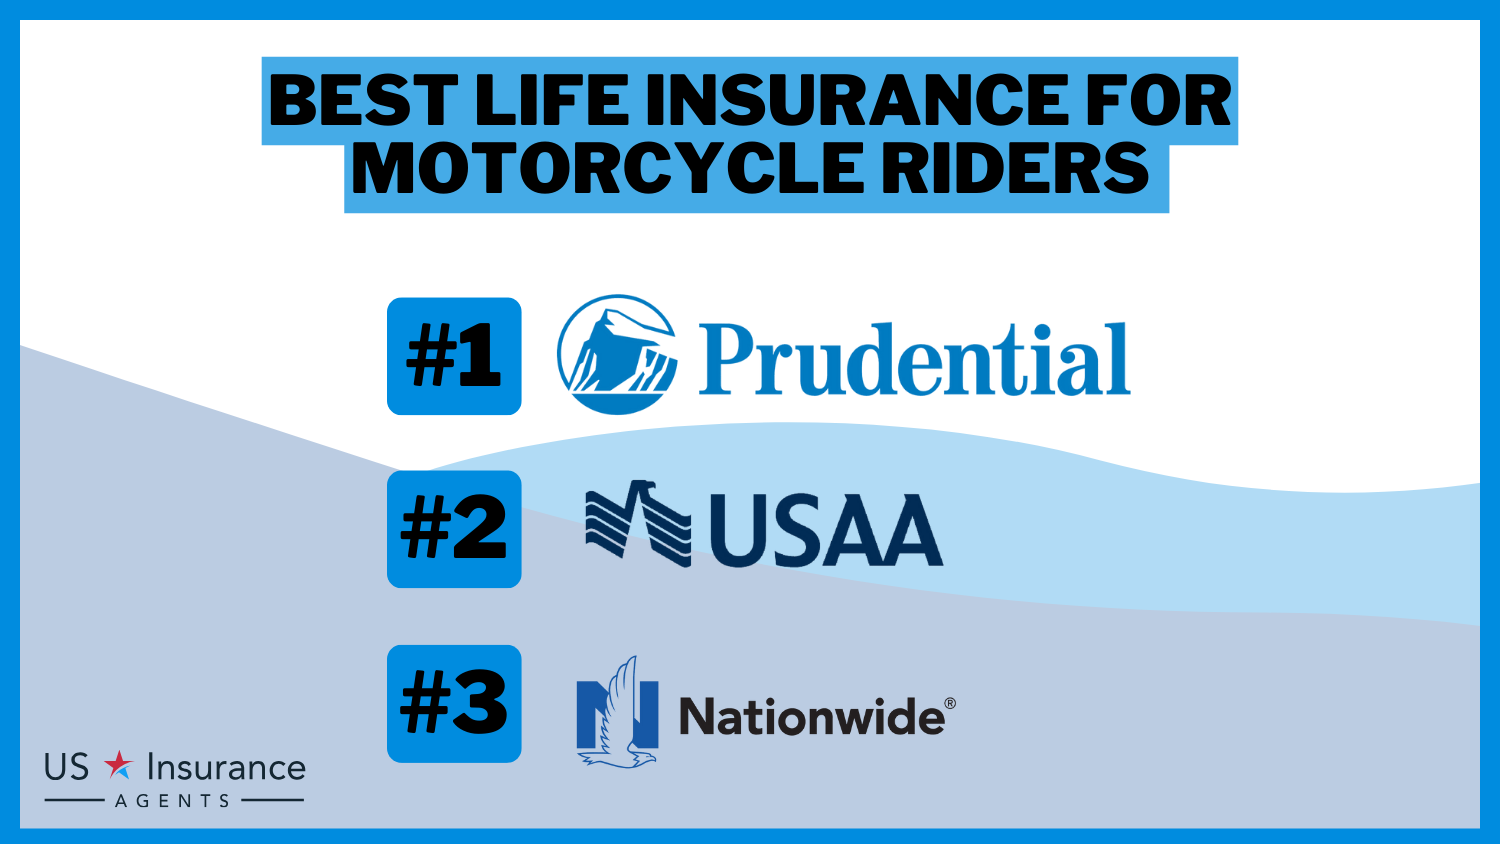 3 Best Life Insurance for Motorcycle Riders-USIA: Prudential, USAA, and Nationwide.